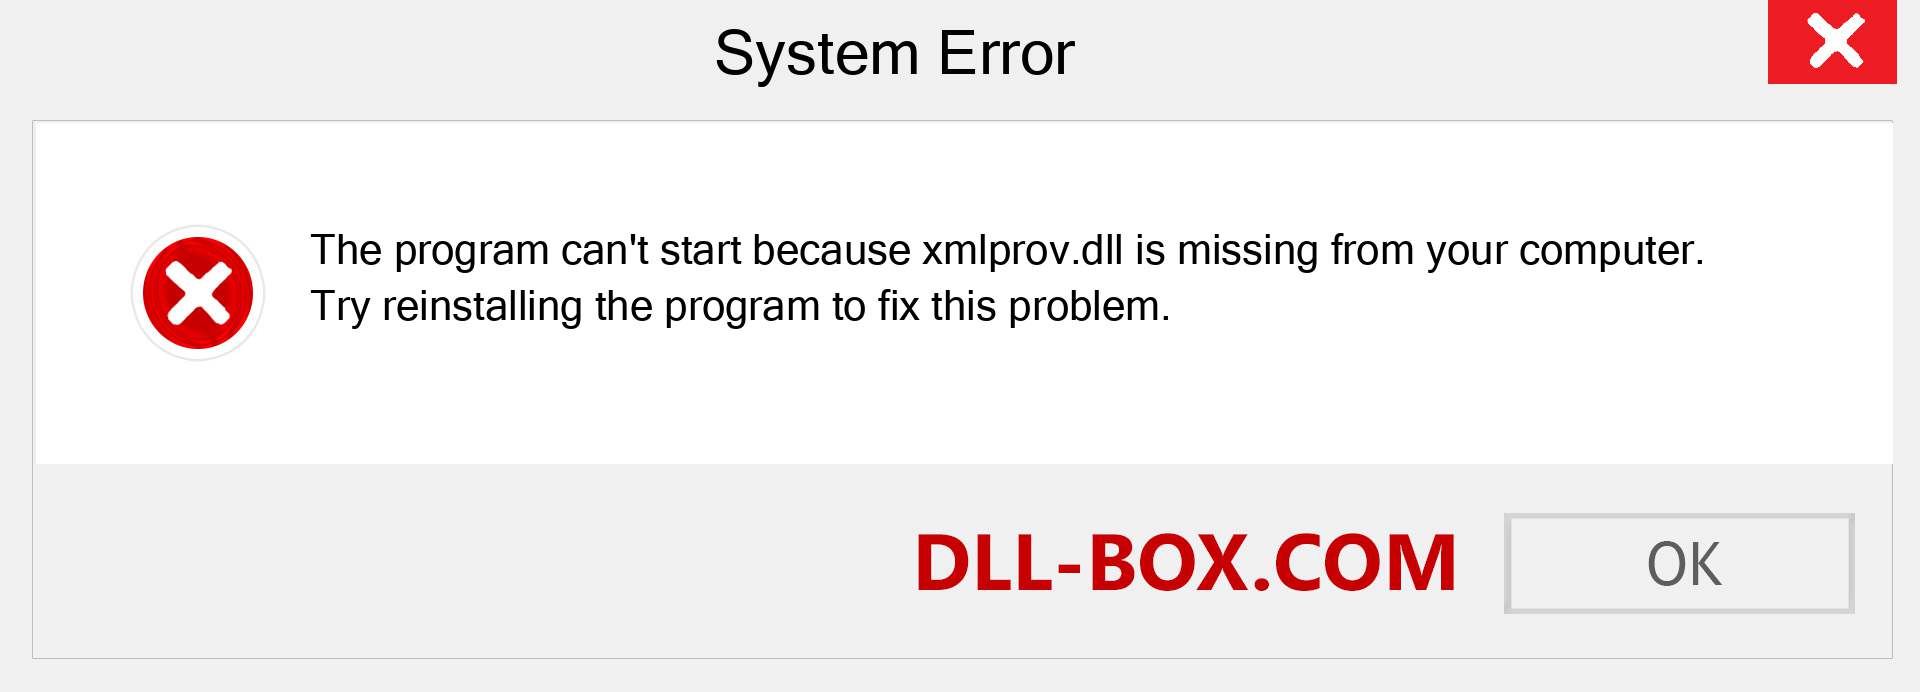  xmlprov.dll file is missing?. Download for Windows 7, 8, 10 - Fix  xmlprov dll Missing Error on Windows, photos, images